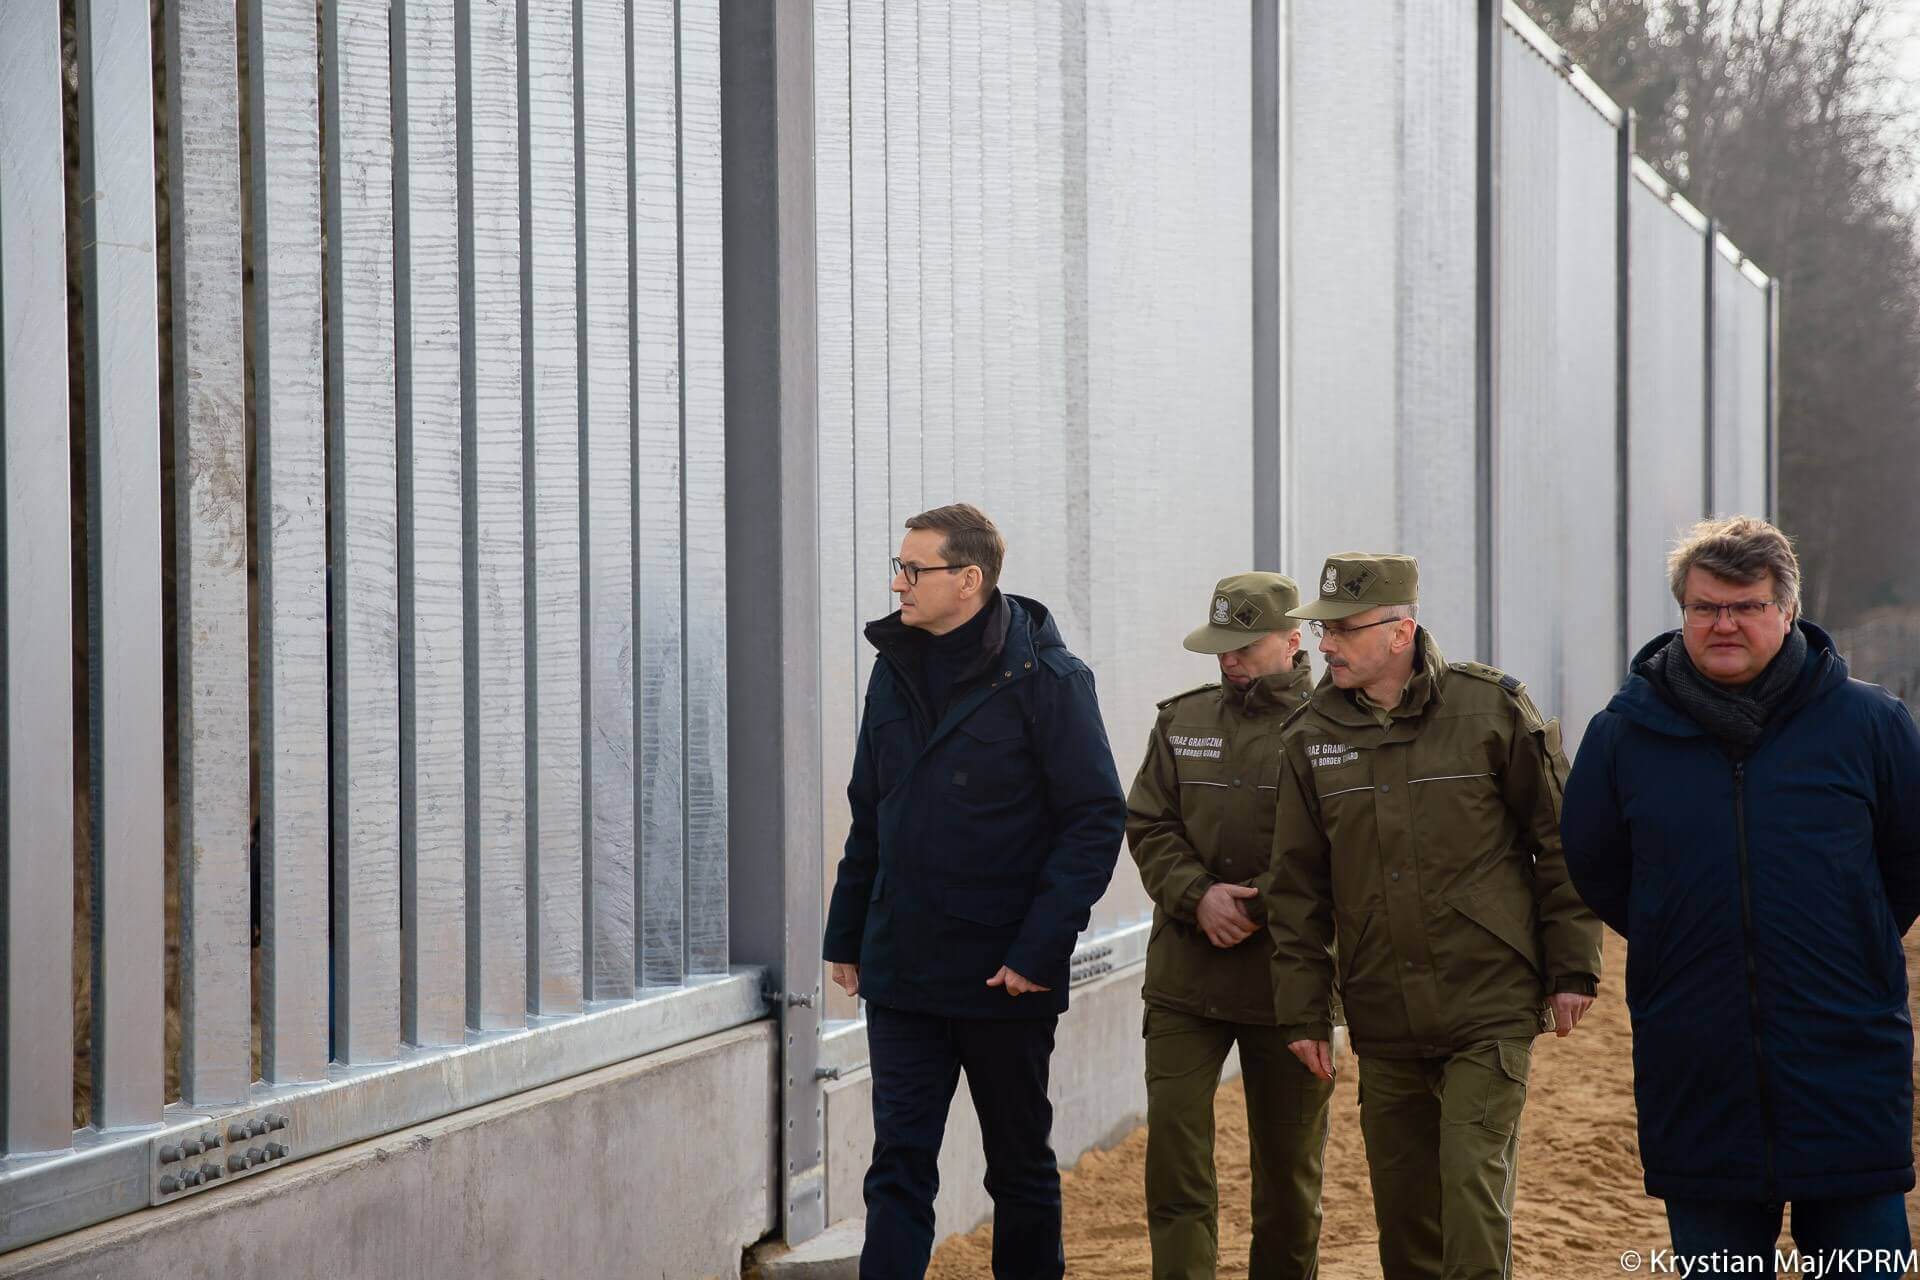 Poland Completes Construction of Border Wall With Belarus to Block Migrants